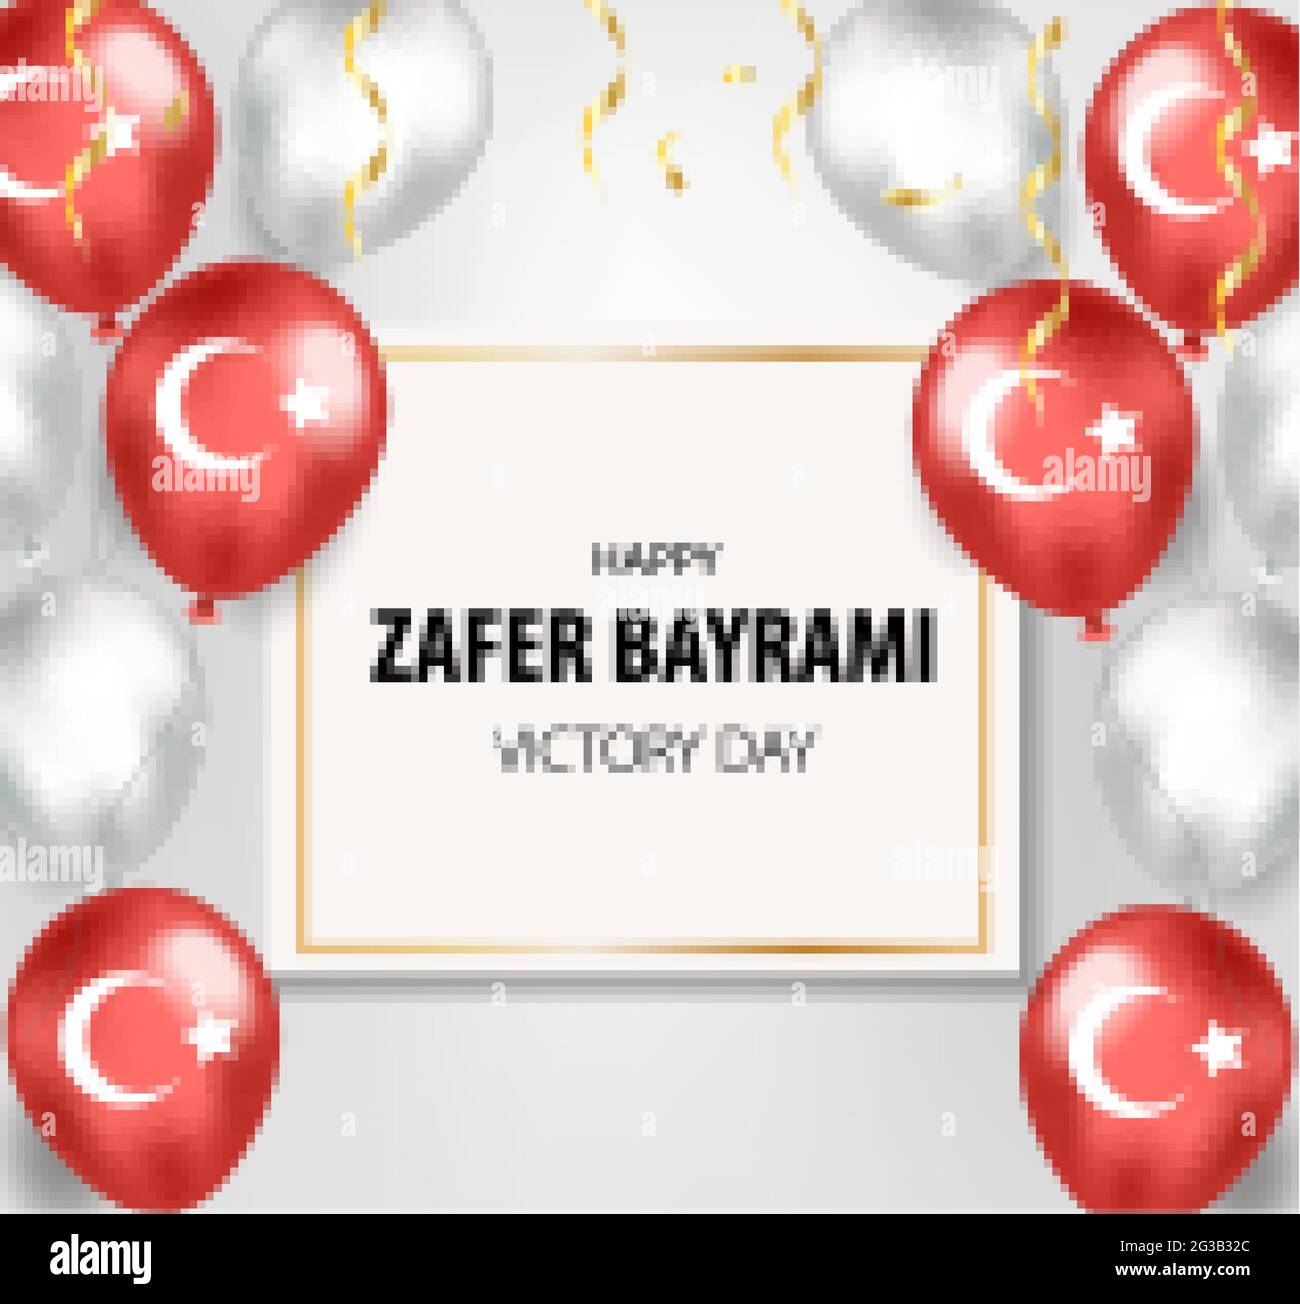 30 august zafer bayrami Victory Day. Translation: August 30 celebration of victory and the National Day in Turkey. Vector Stock Vector